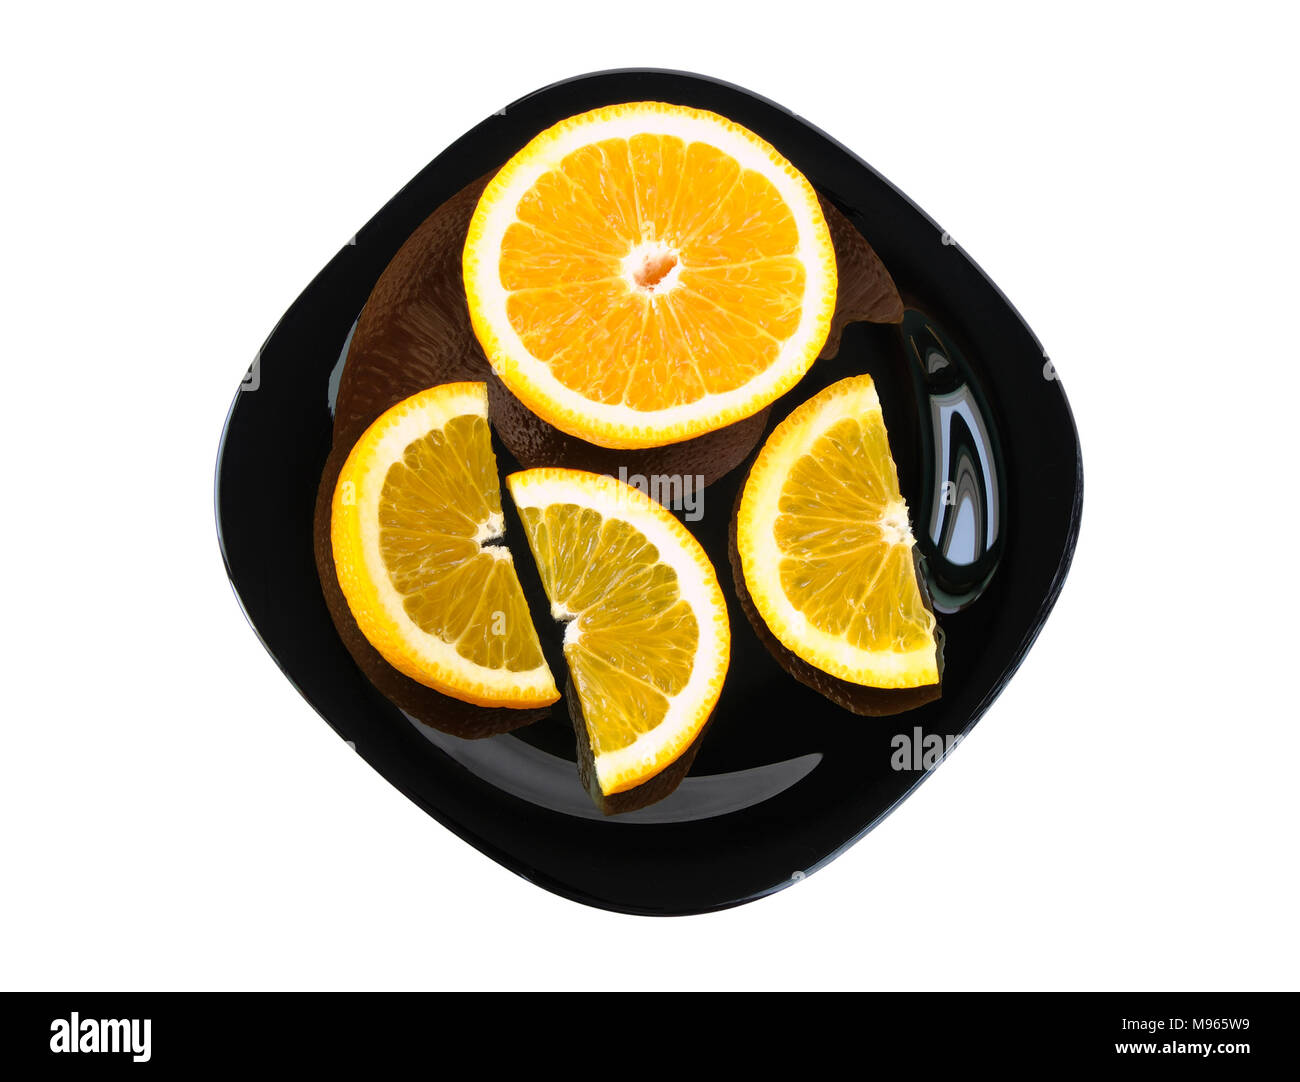 Slices of orange on a plate on white background Stock Photo